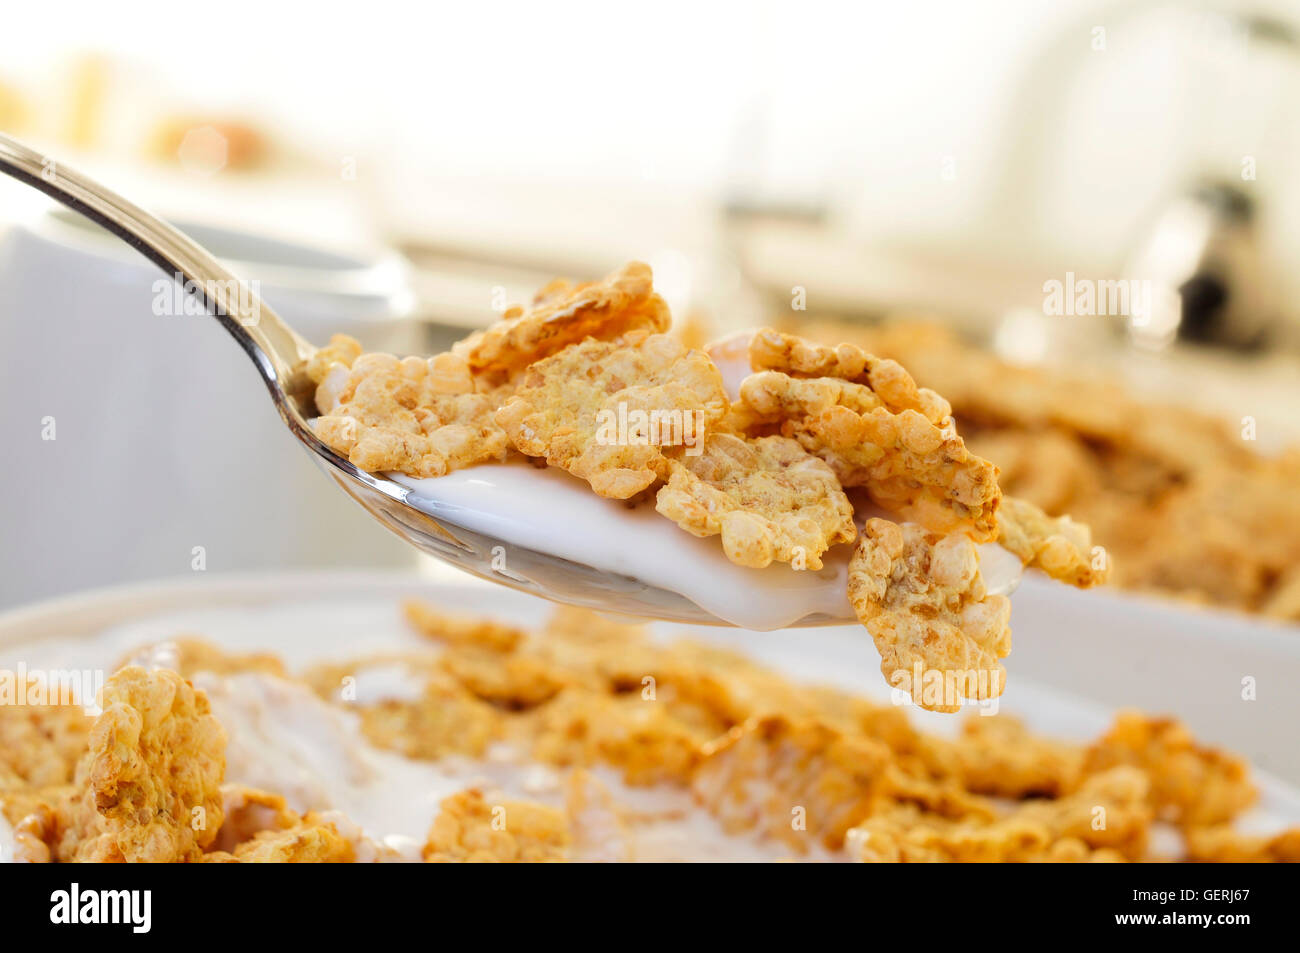 closeup of a spoon and a bowl with breakfast cereals soaked in yogurt Stock Photo